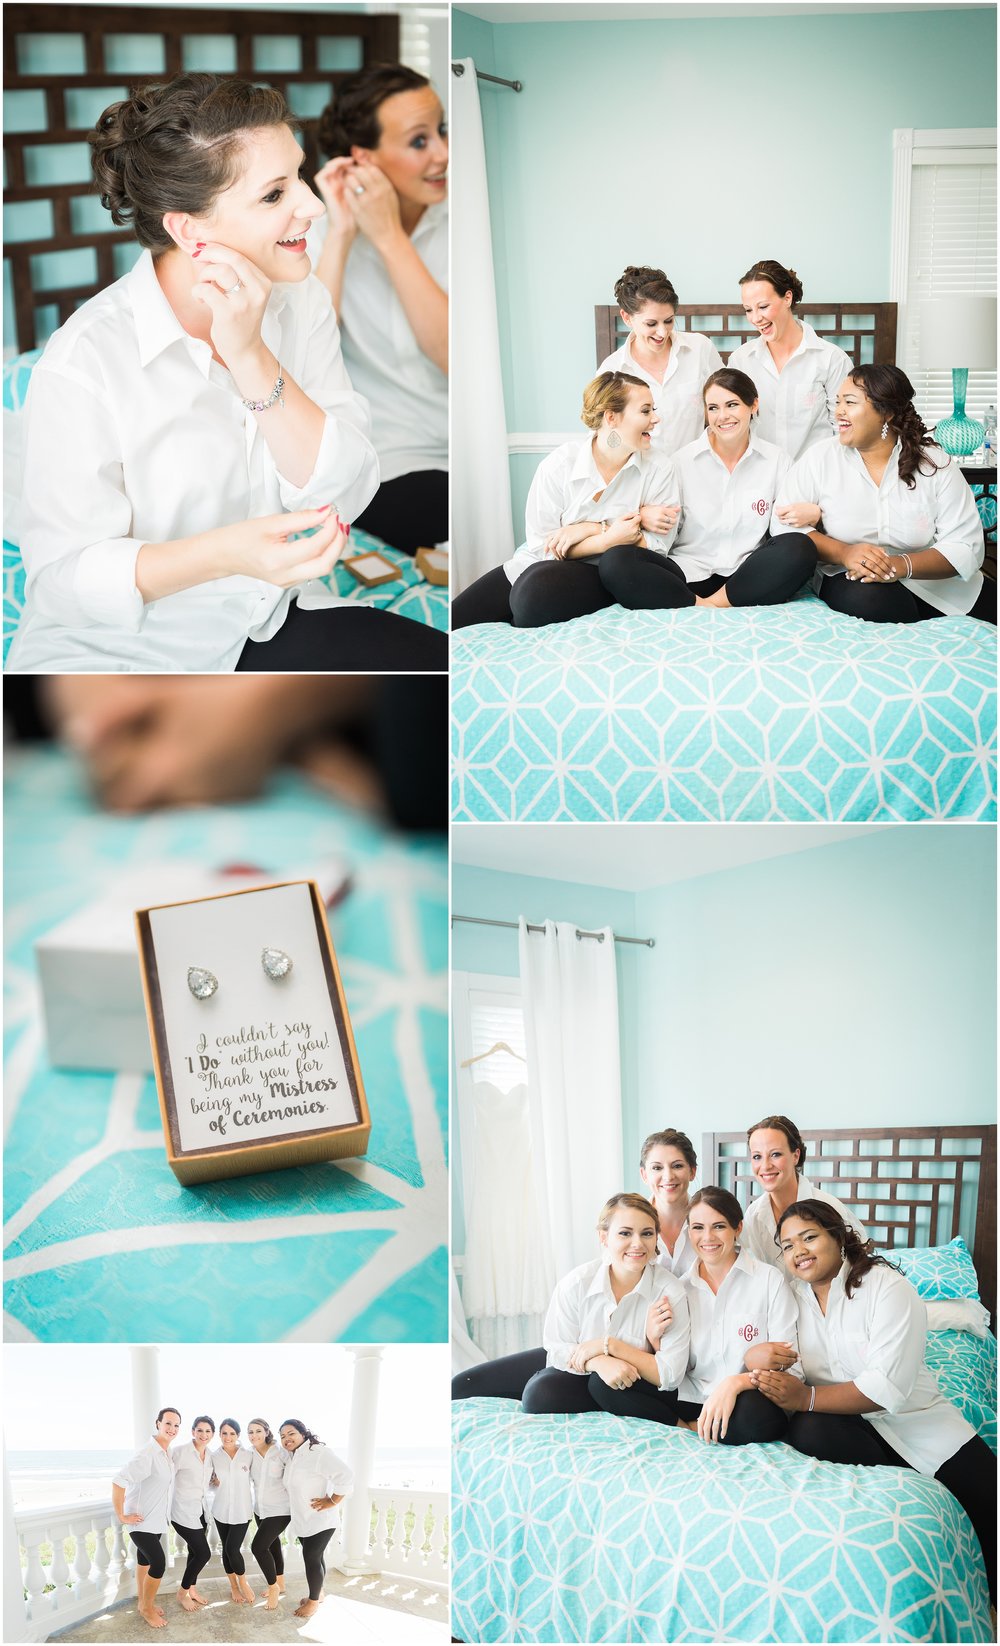 Teal Bed for bridal party photos